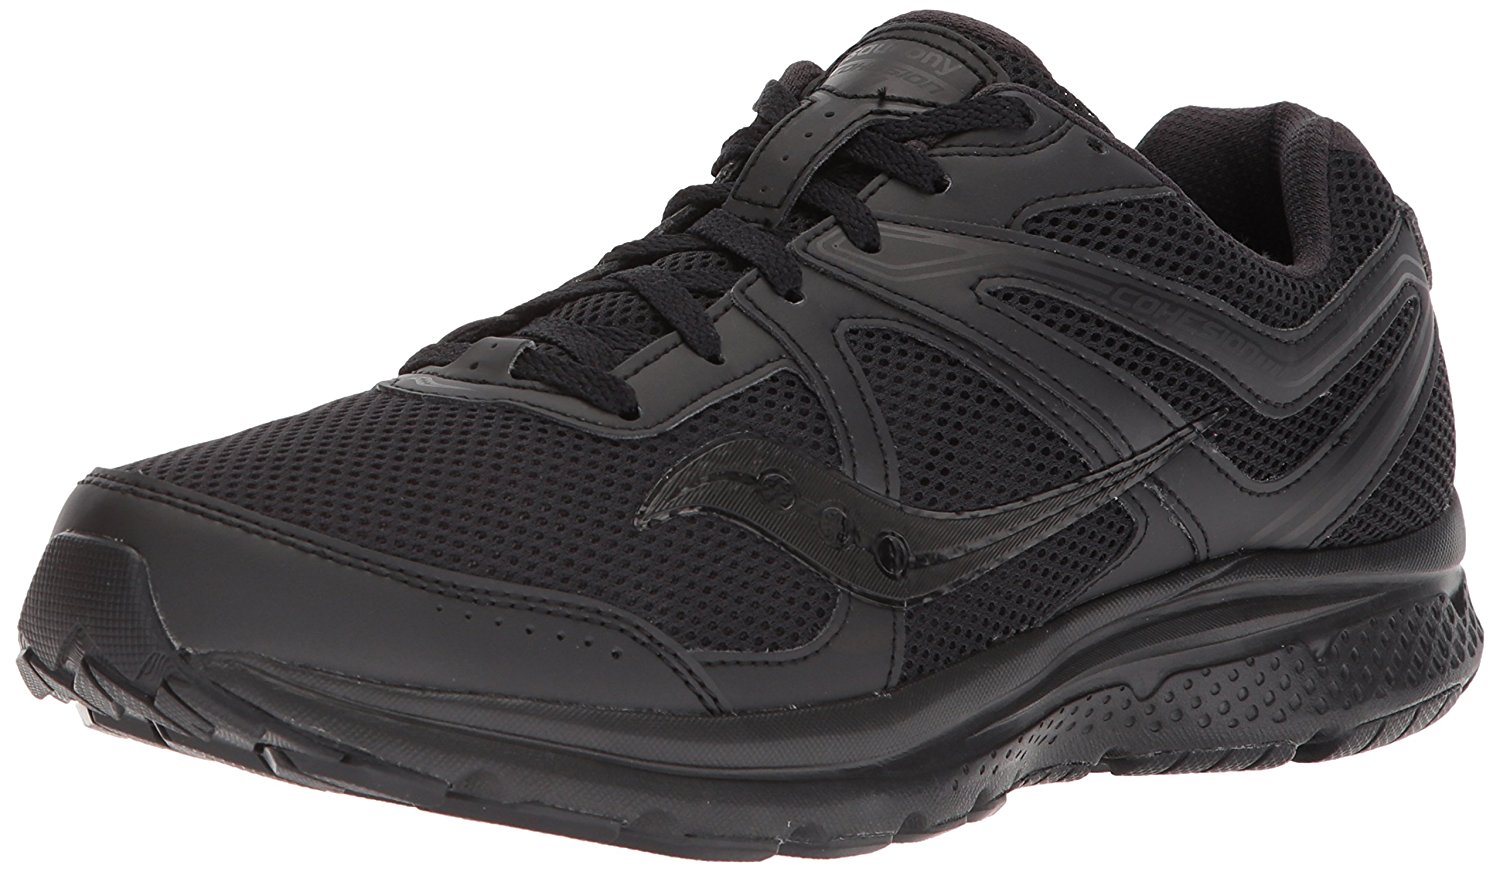 Saucony Men's Cohesion 11 Ankle-High Running Shoe 